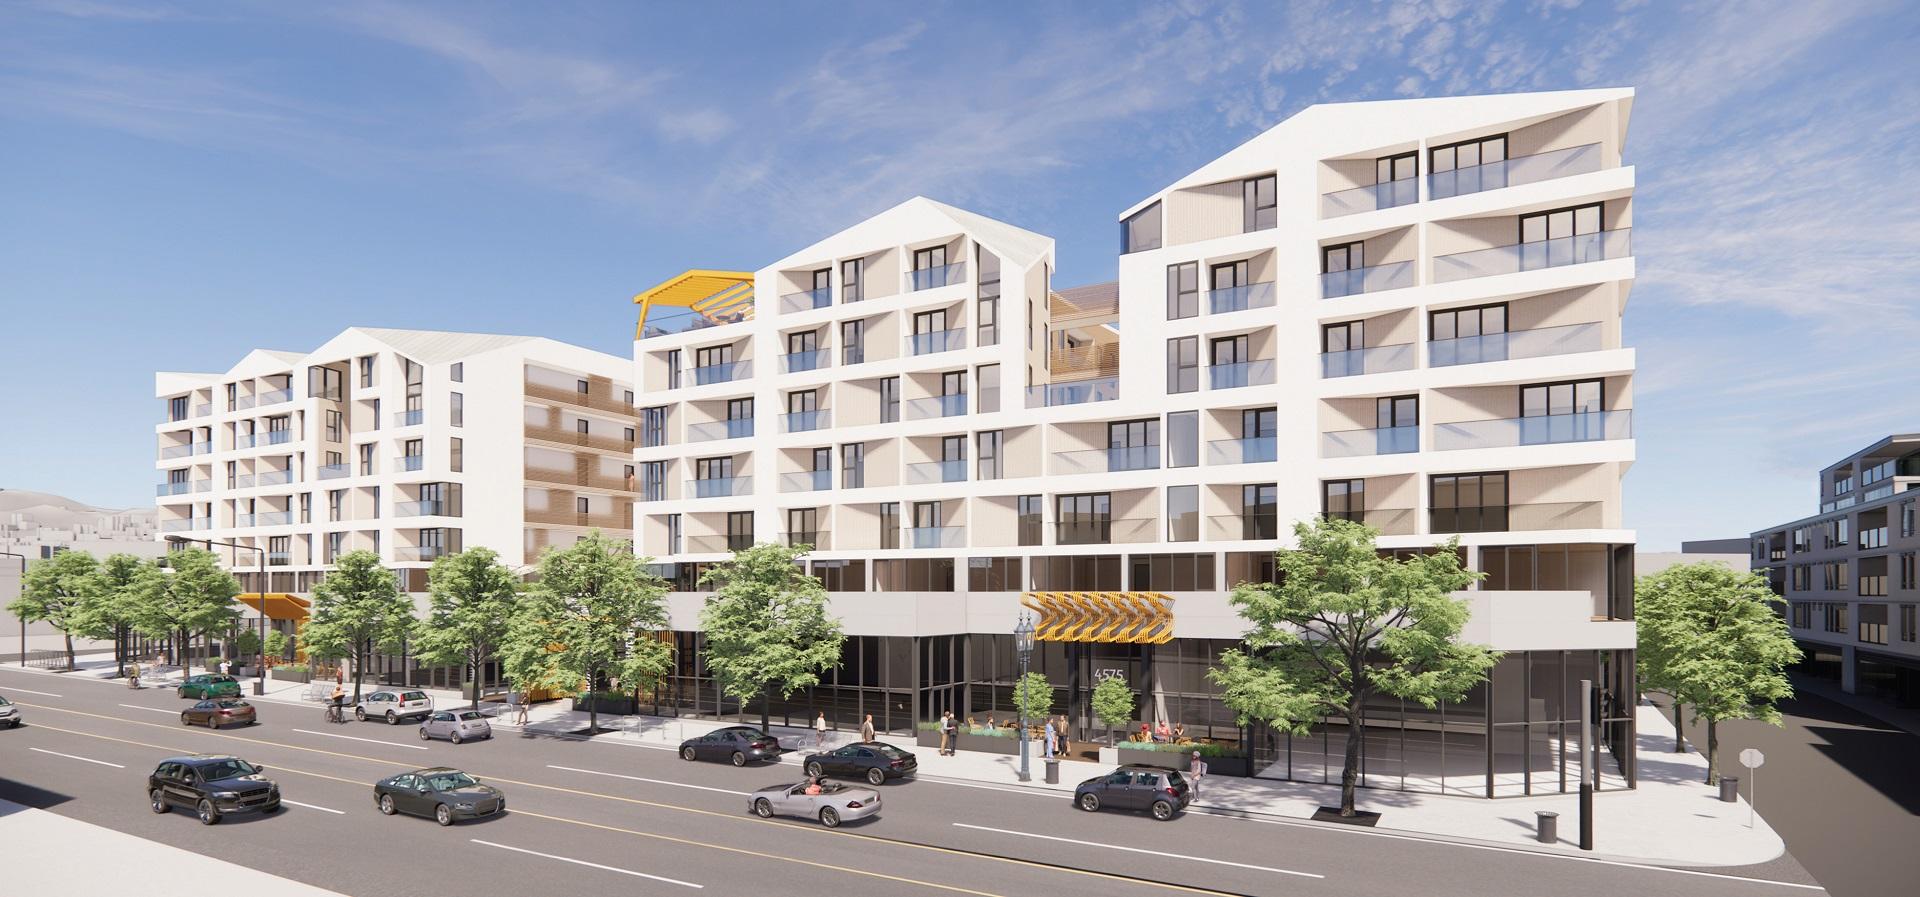 Mixed-use apartment complex planned at 4579-4627 Hollywood 